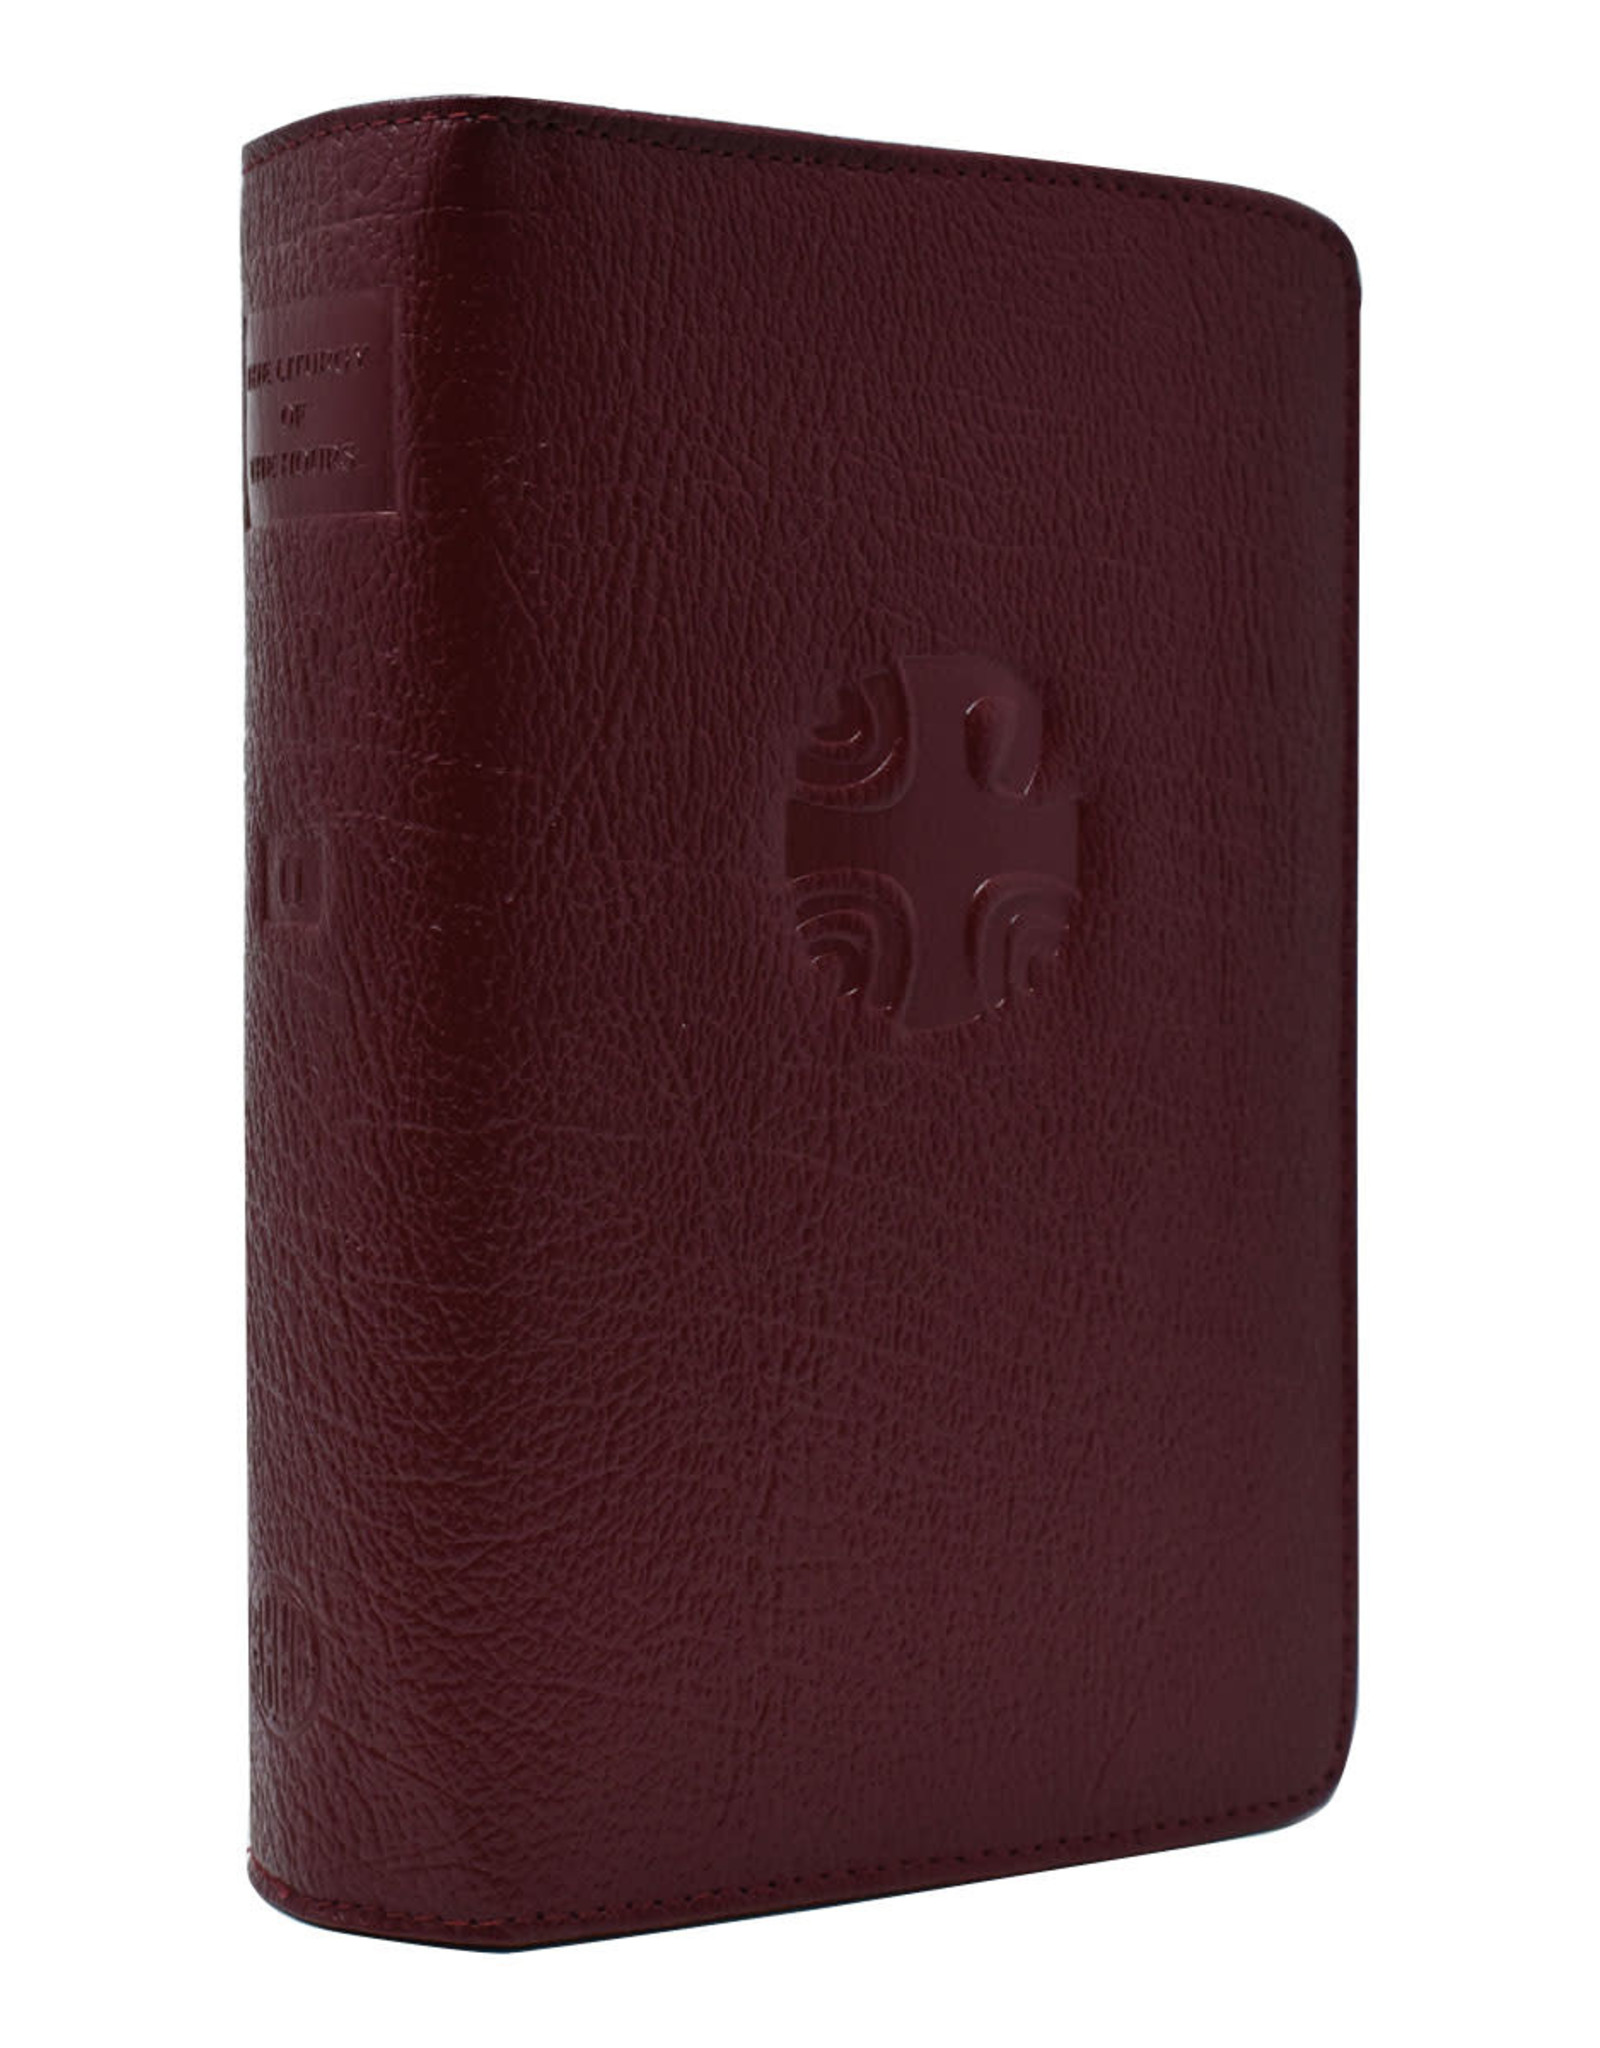 Catholic Book Publishing Cover - Liturgy of the Hours Vol 2 Red Leather